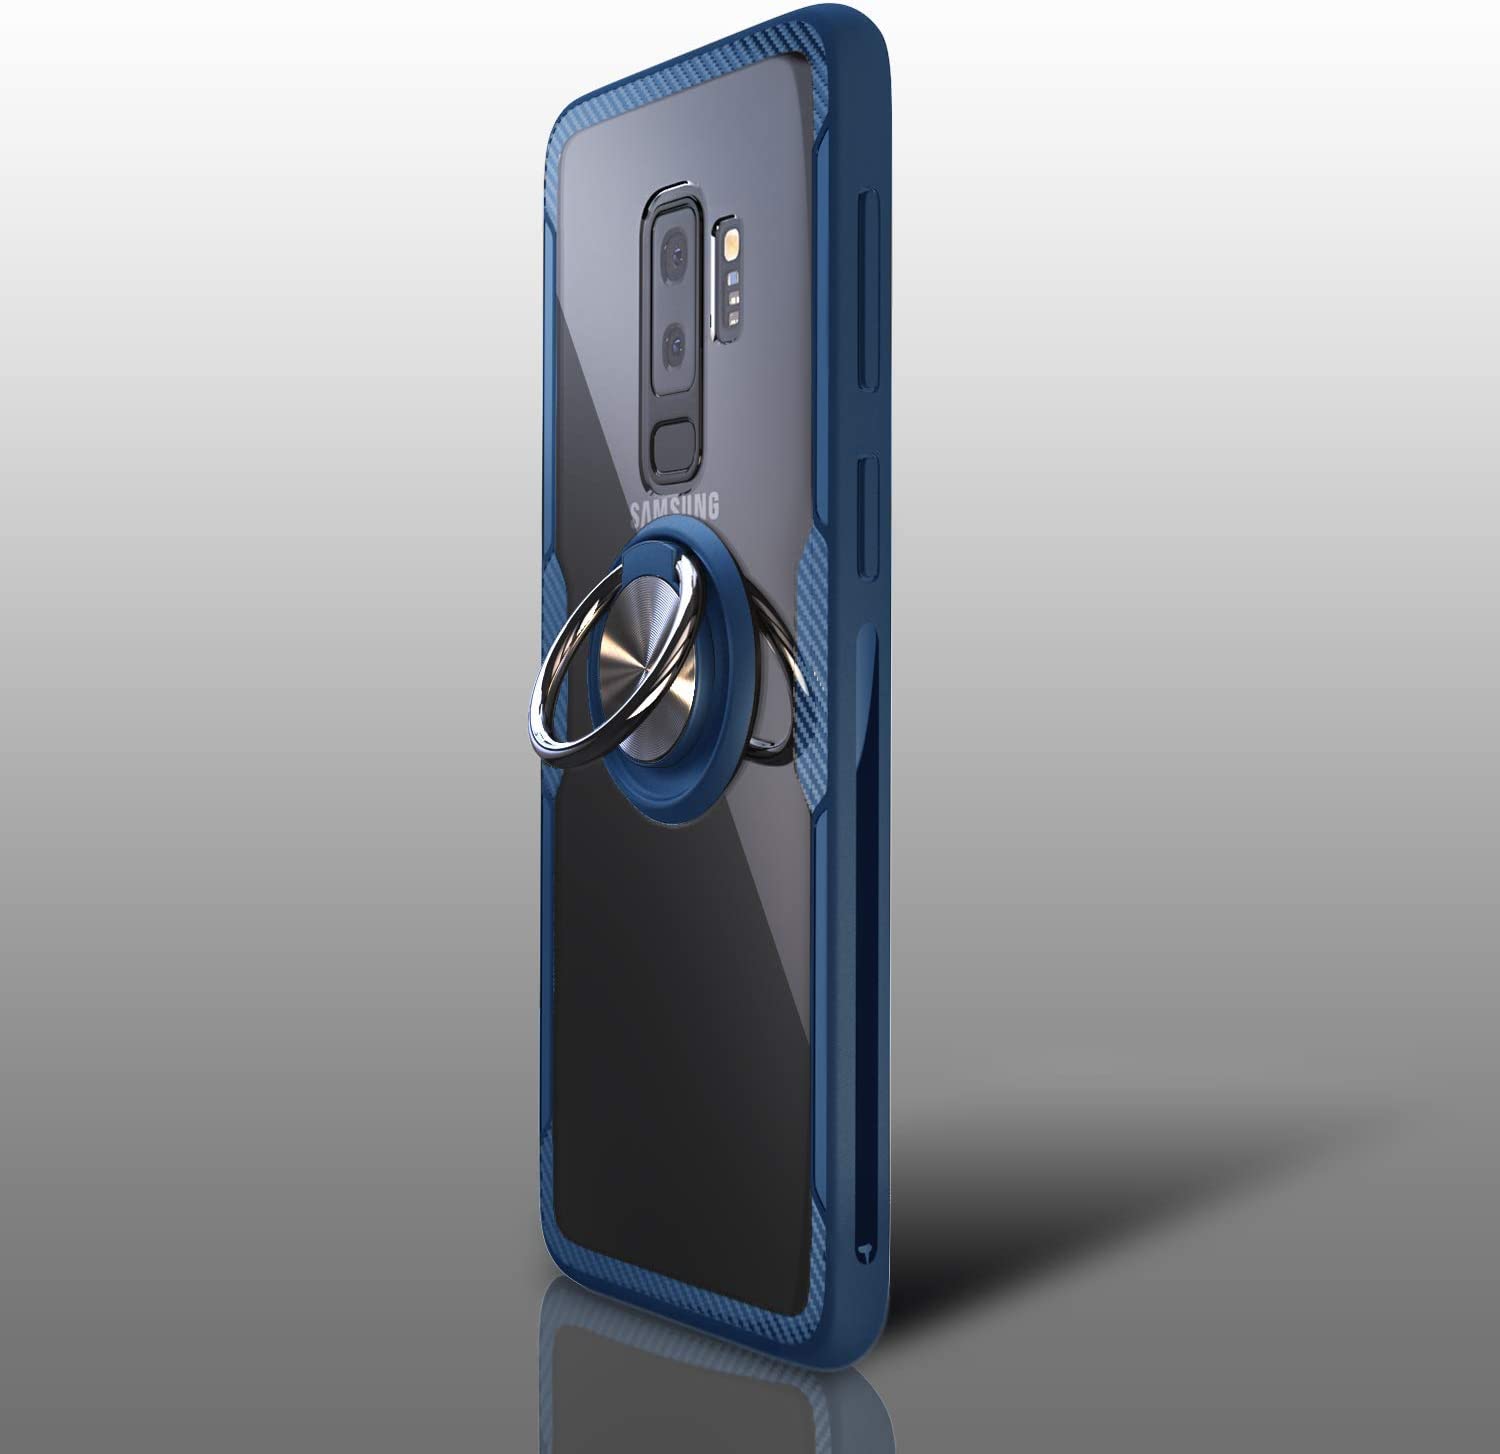 Samsung Galaxy S9+ Case with Ring Holder Blue